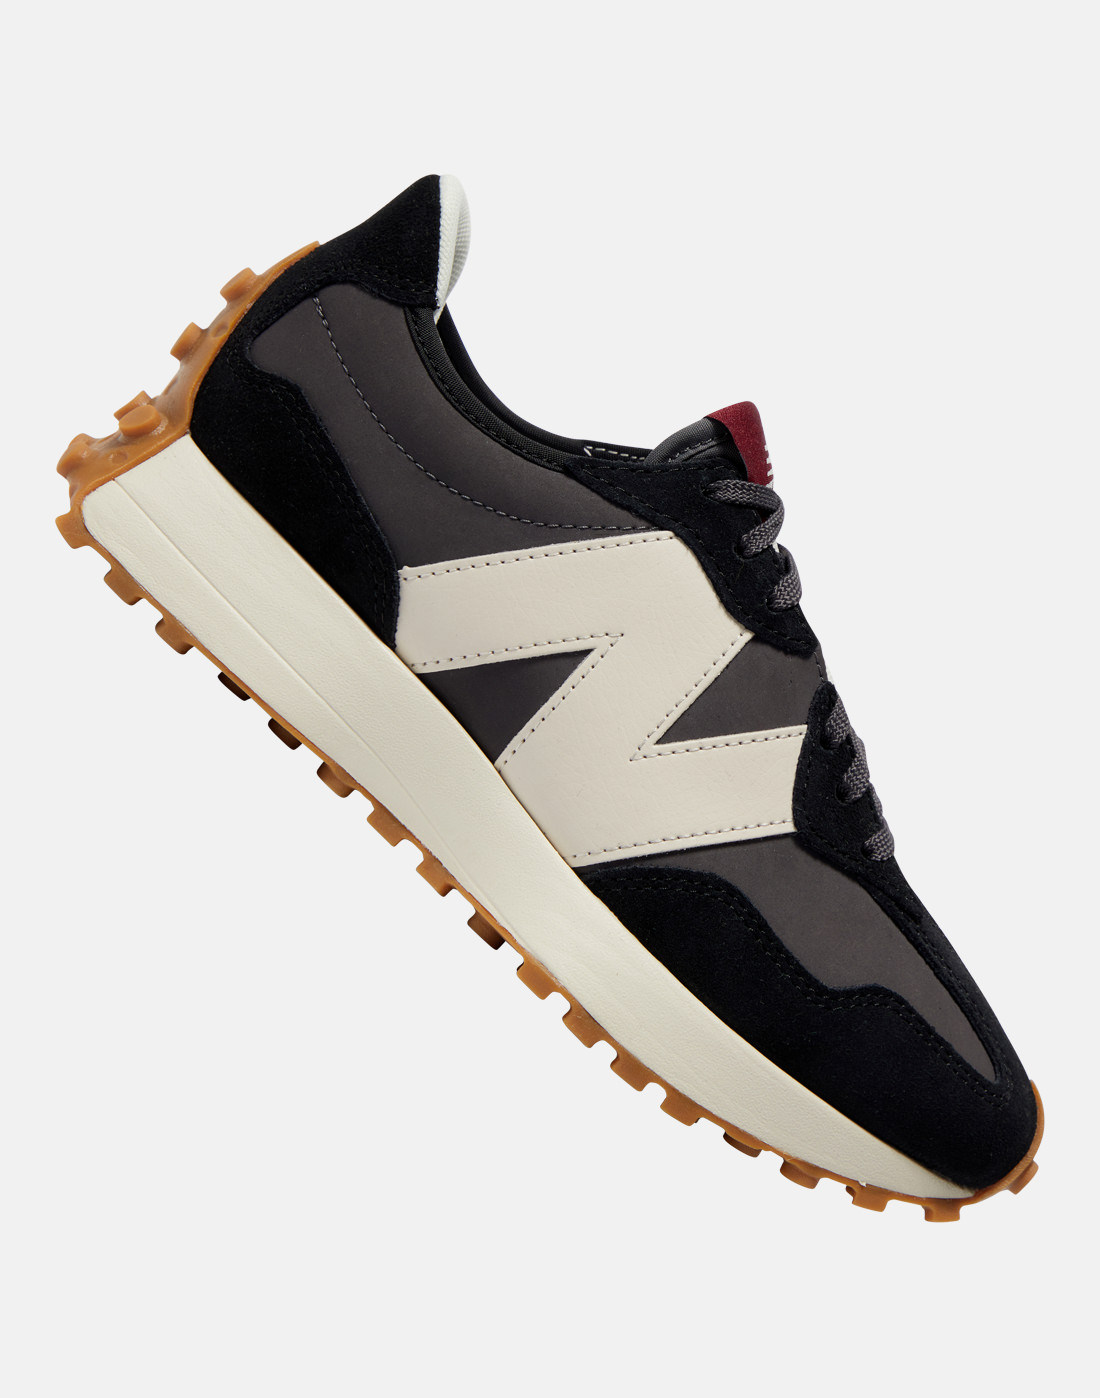 New Balance Womens 327 Trainers - Black | Life Style Sports IE